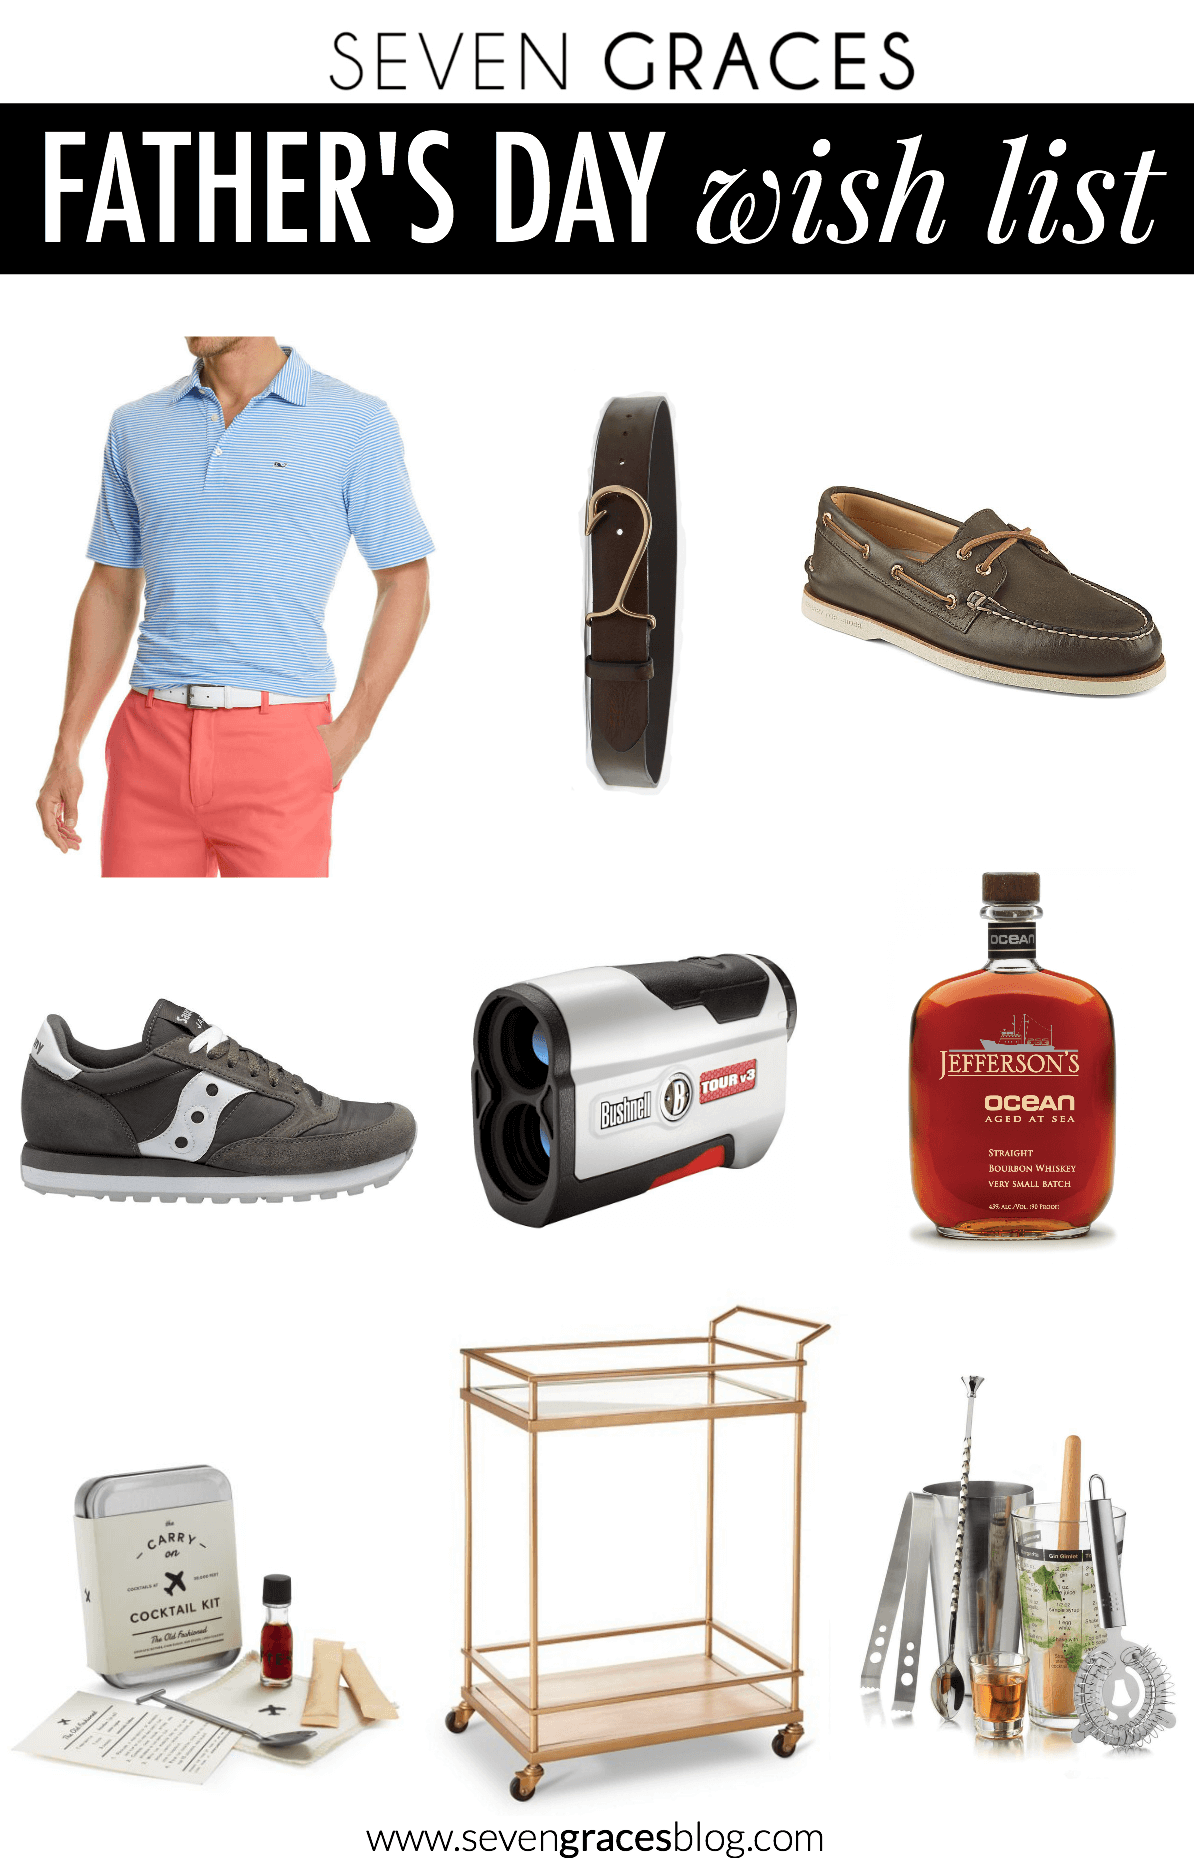 The Father's Day Gift Guide and Wish List for the golf-loving, fine-drink making, preppy and sophisticated dad. 